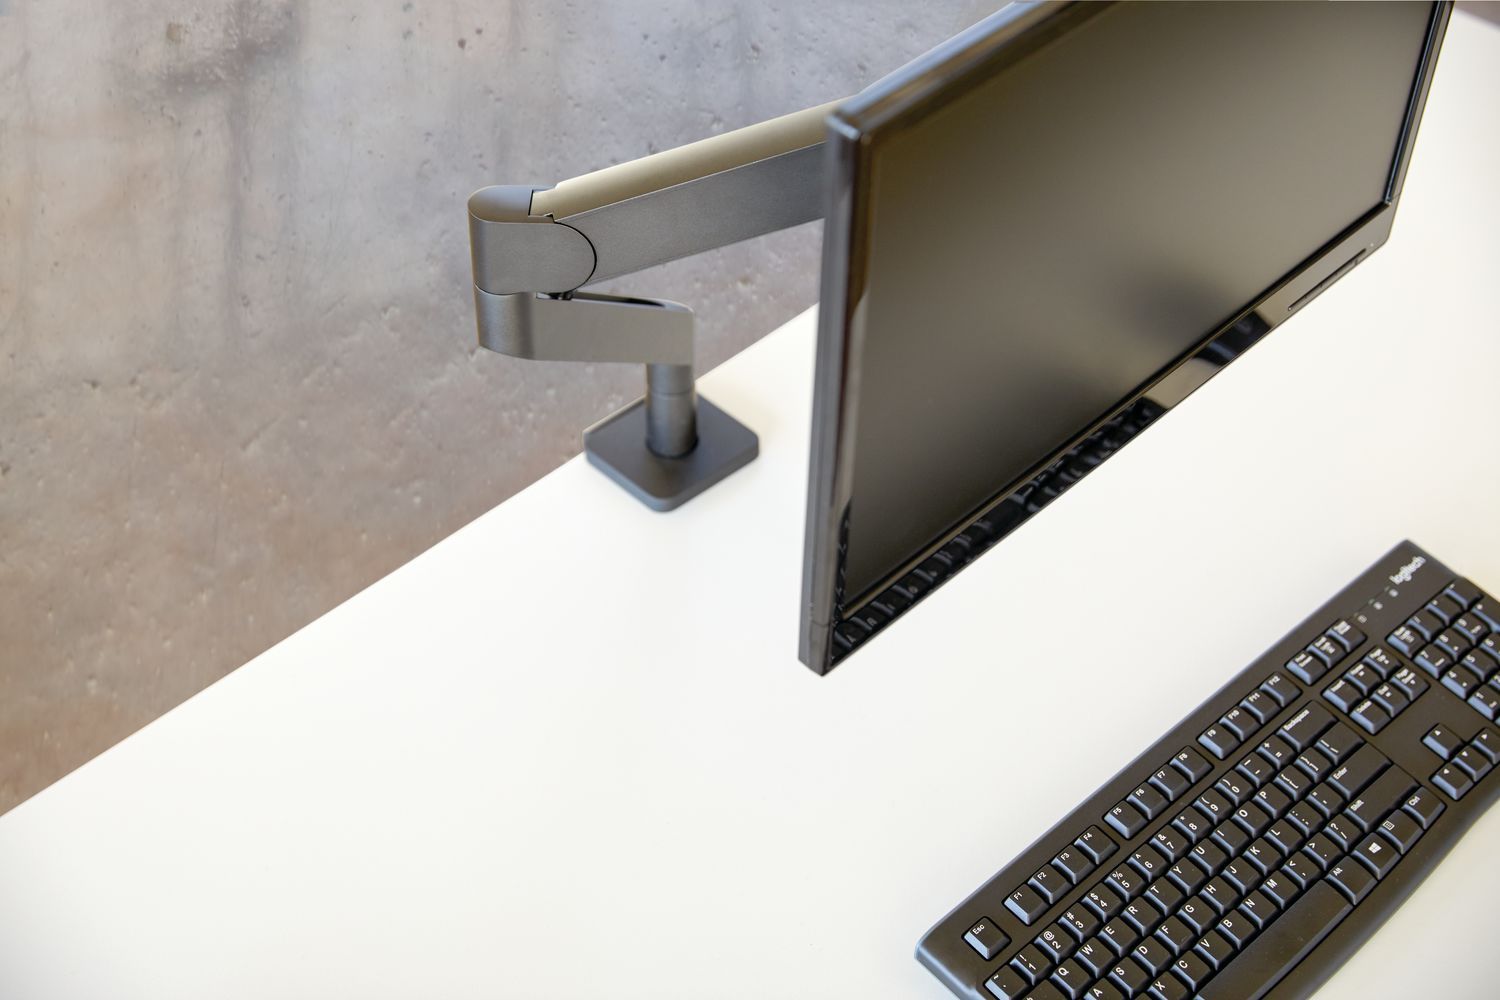 Swerv Single Monitor Arm (for Sample Client Portal), by Teknion